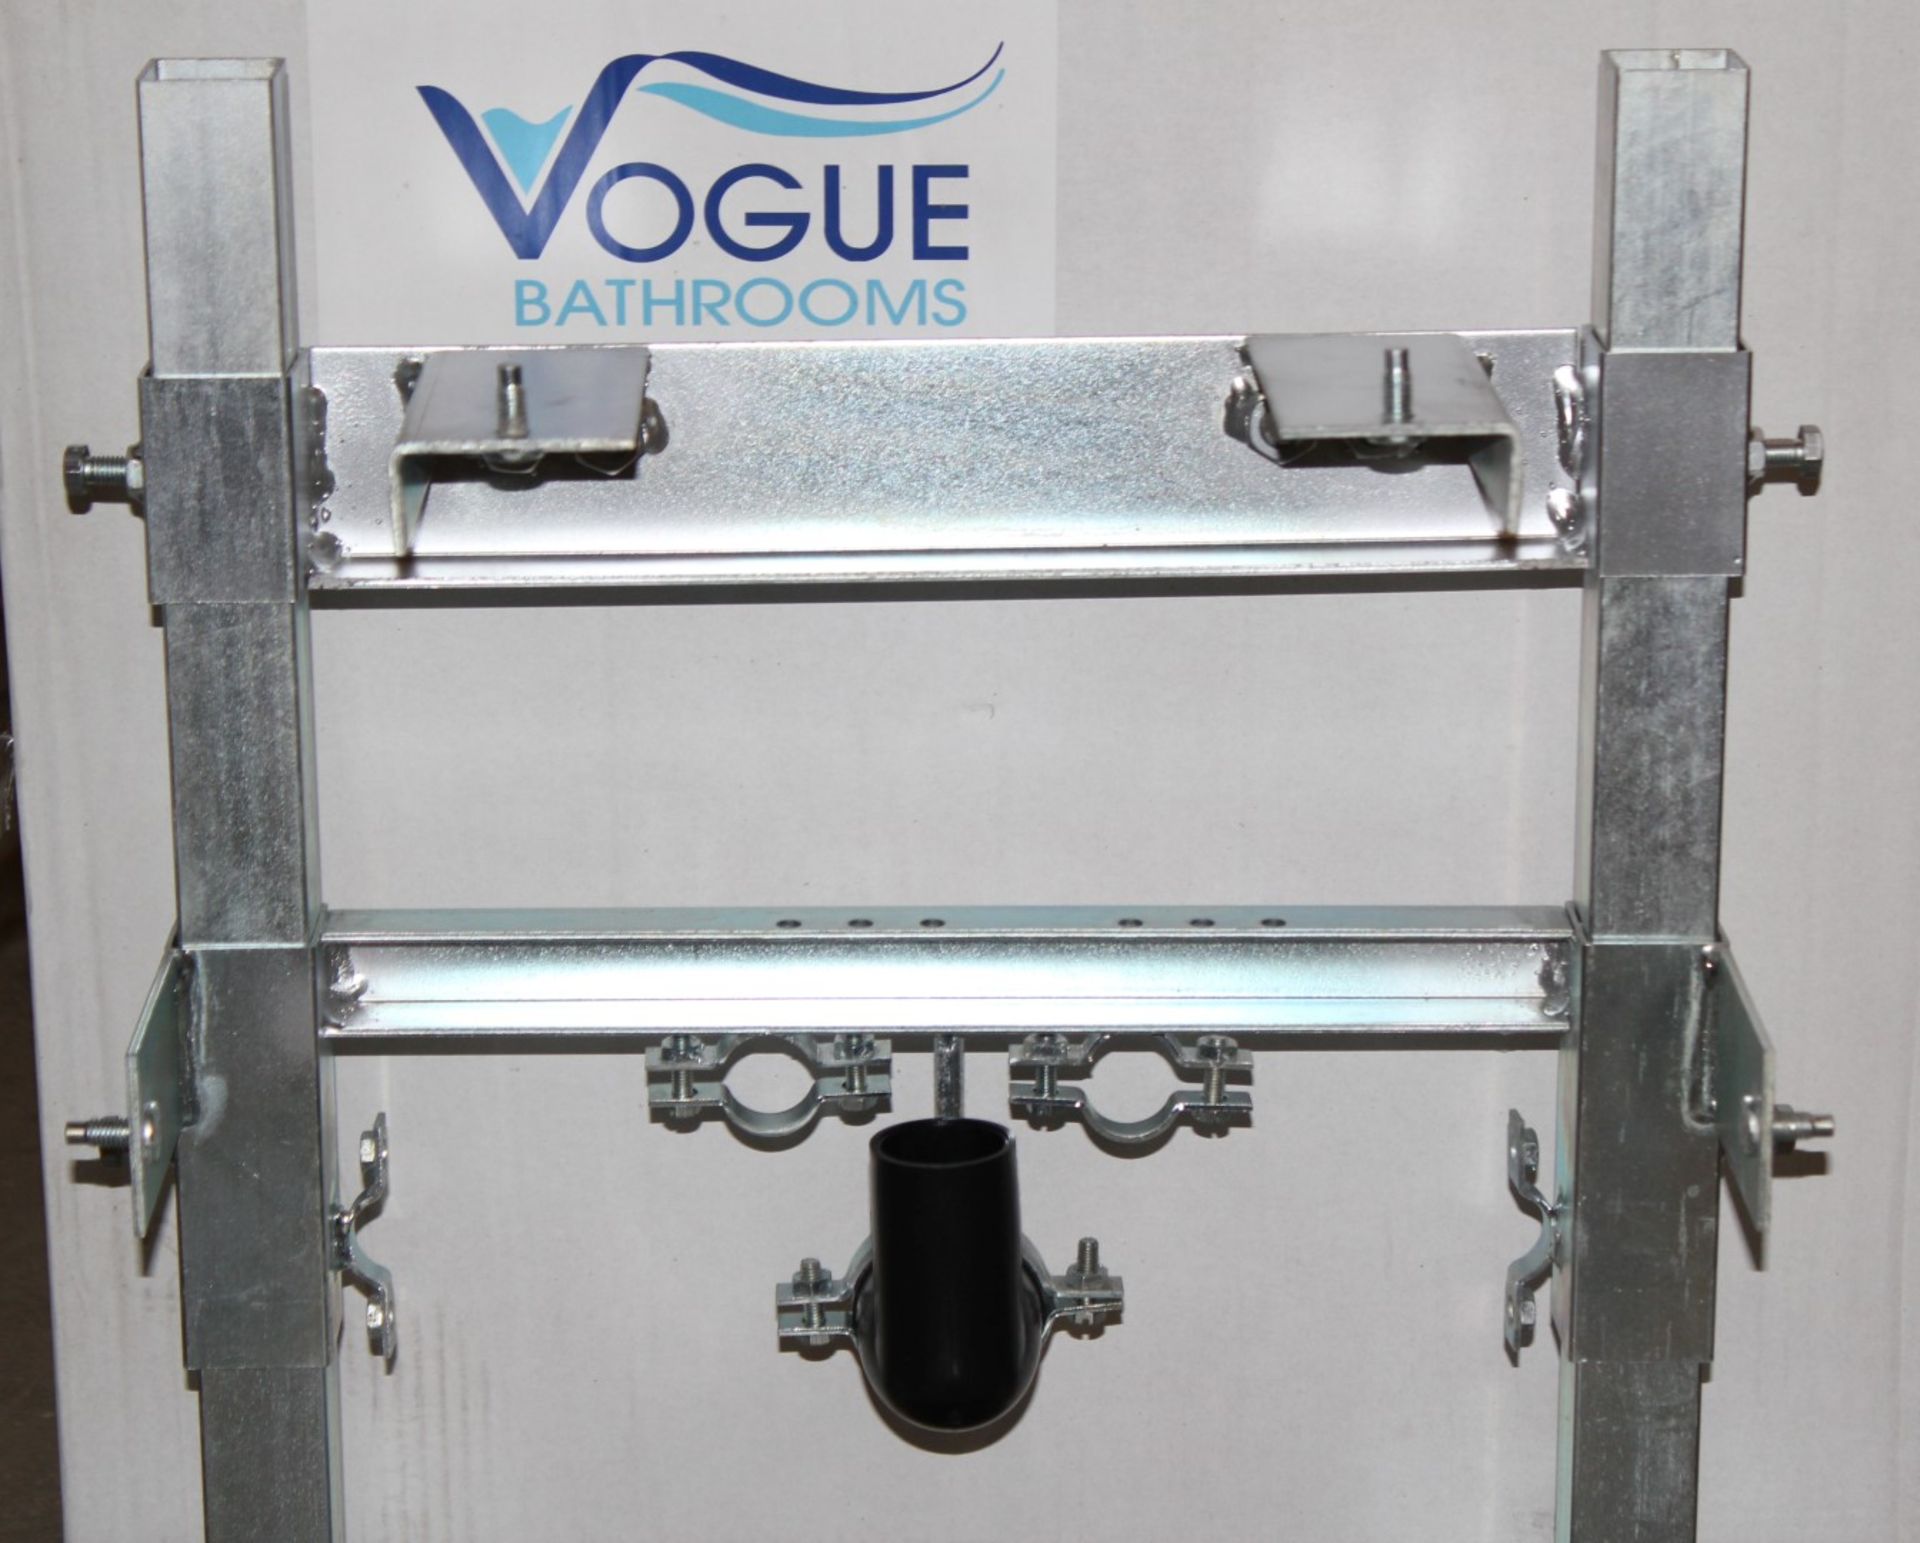 1 x Vogue Bathrooms Suspended Bidet Support Frame With Fittings - Type VPAVE3 - Brand New Boxed - Image 2 of 5